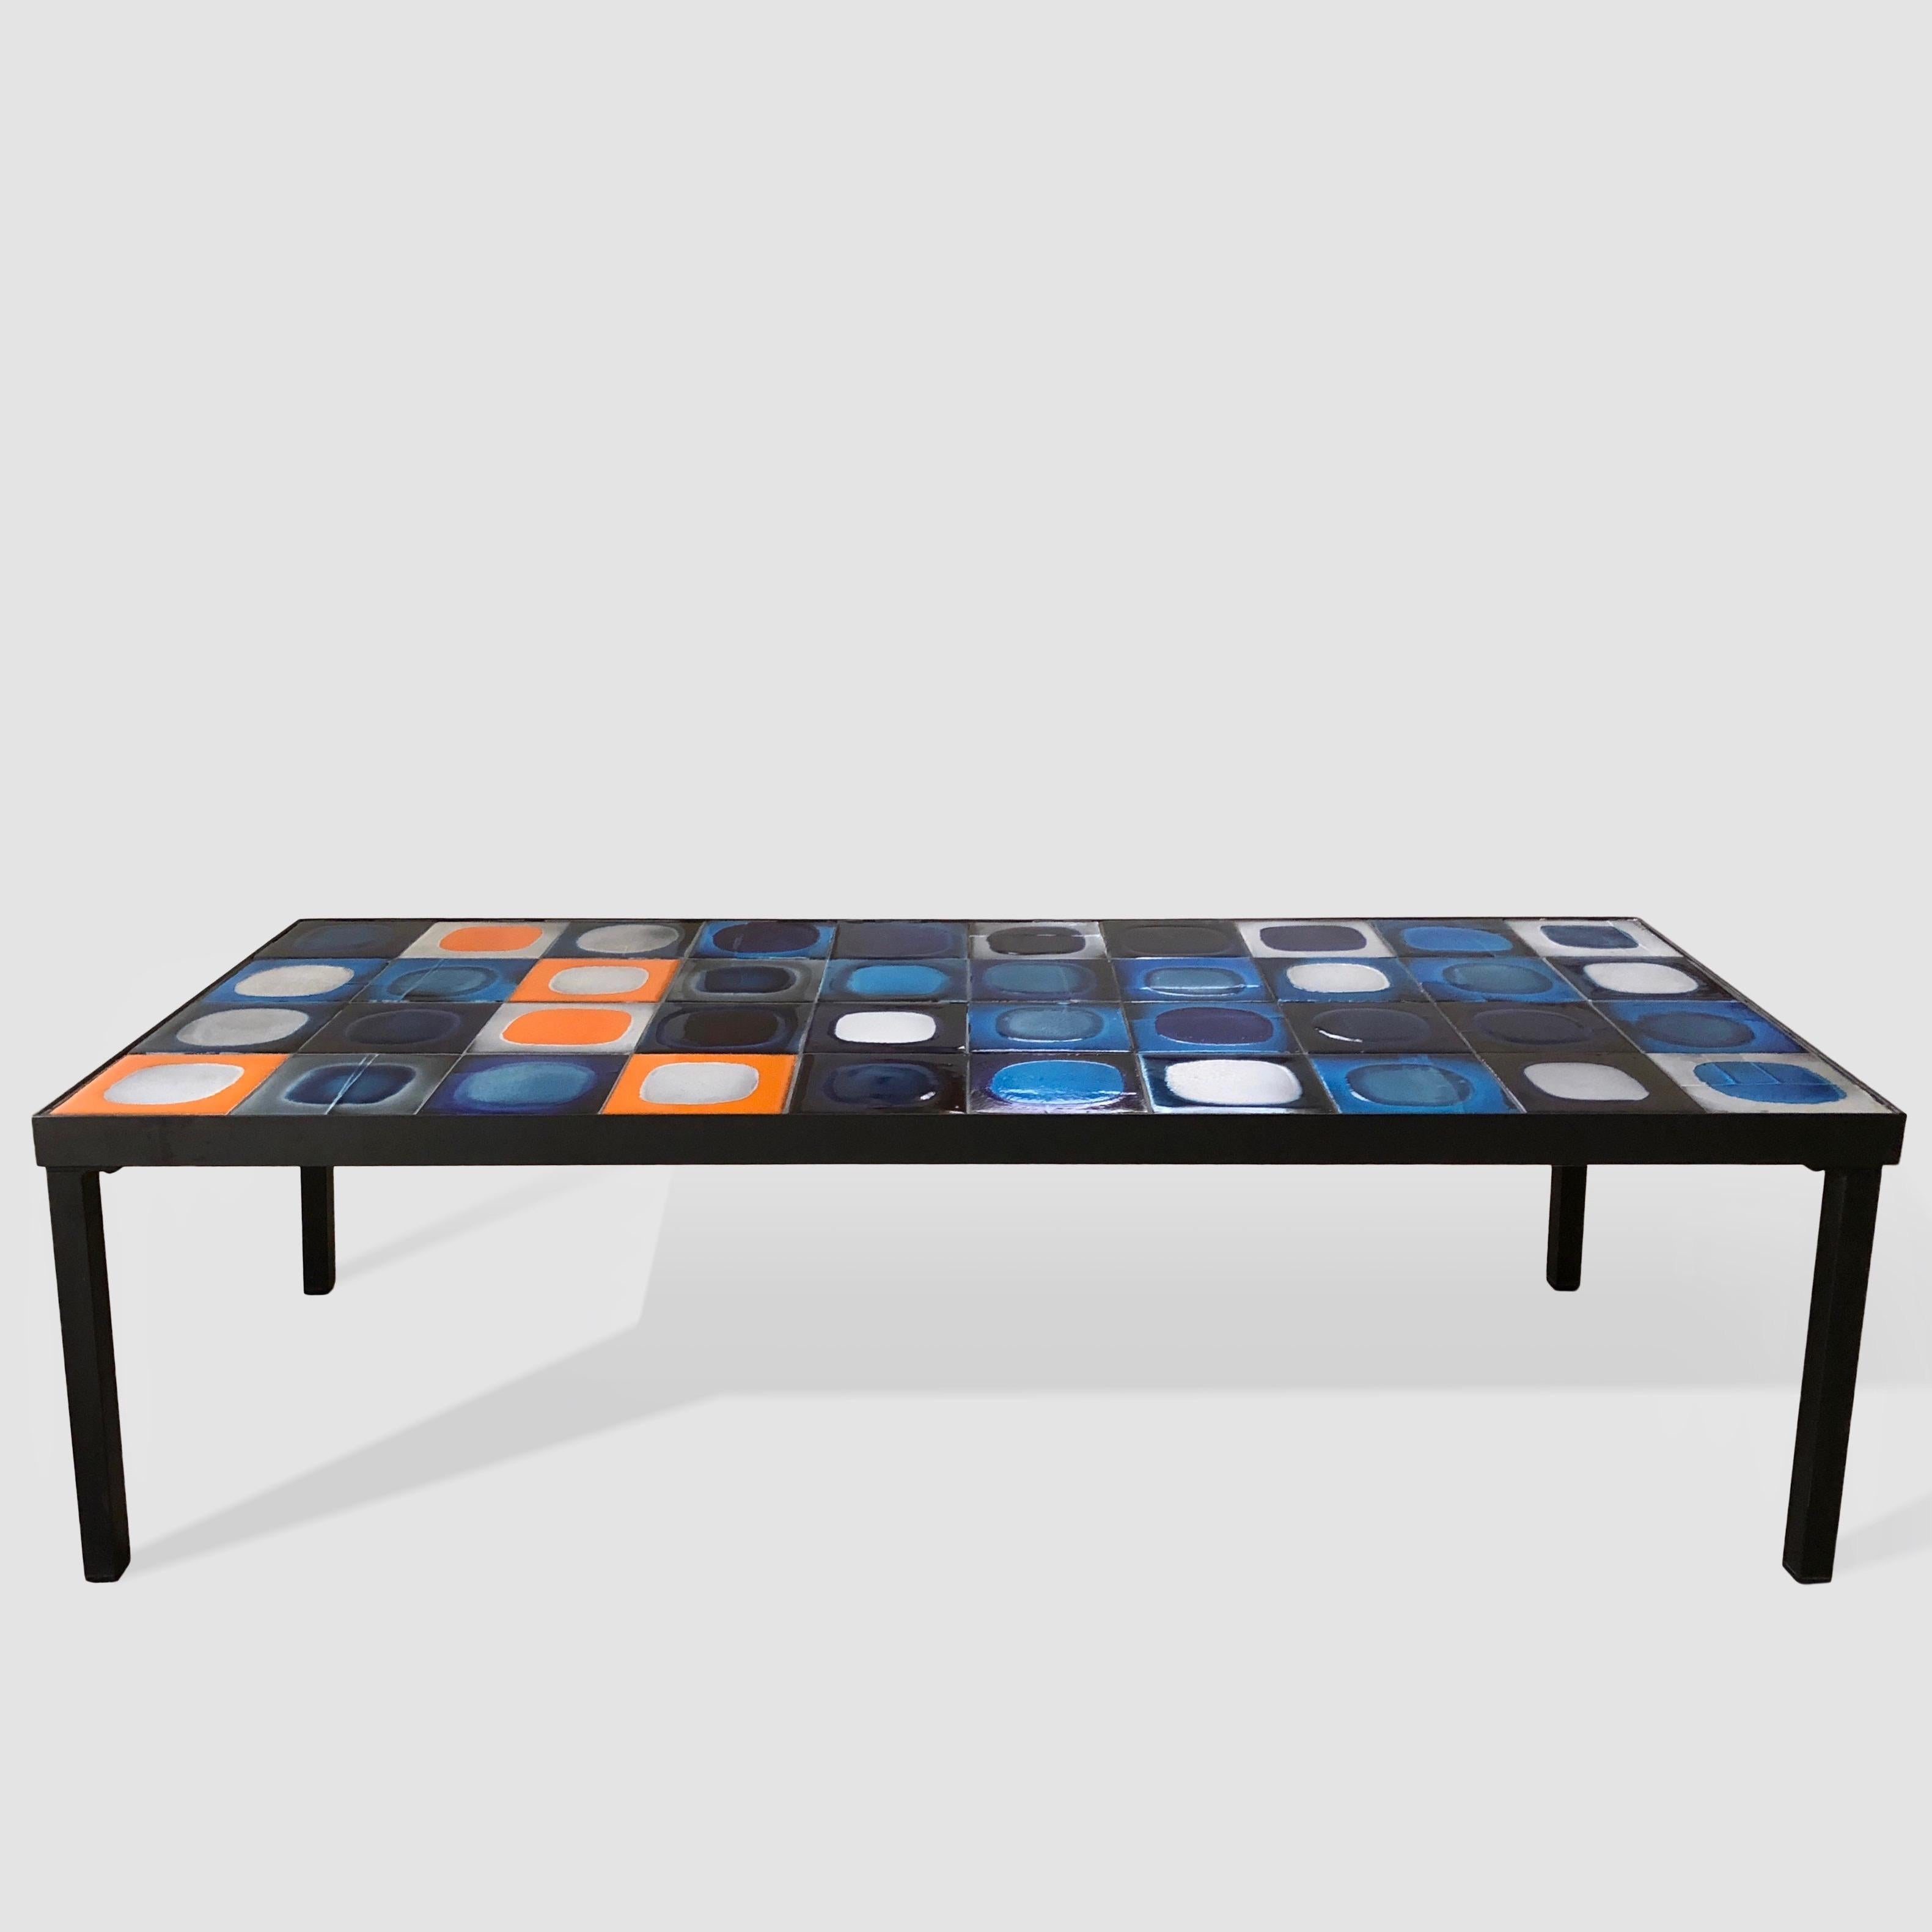 Glazed ceramic tiles table top coffee table on black metal frame and legs.
Mid-20th century model designed by the French artist Roger Capron.

Model named planètes (planets) with rare ceramic tiles glazed in shiny and matte tons of blue, white, grey